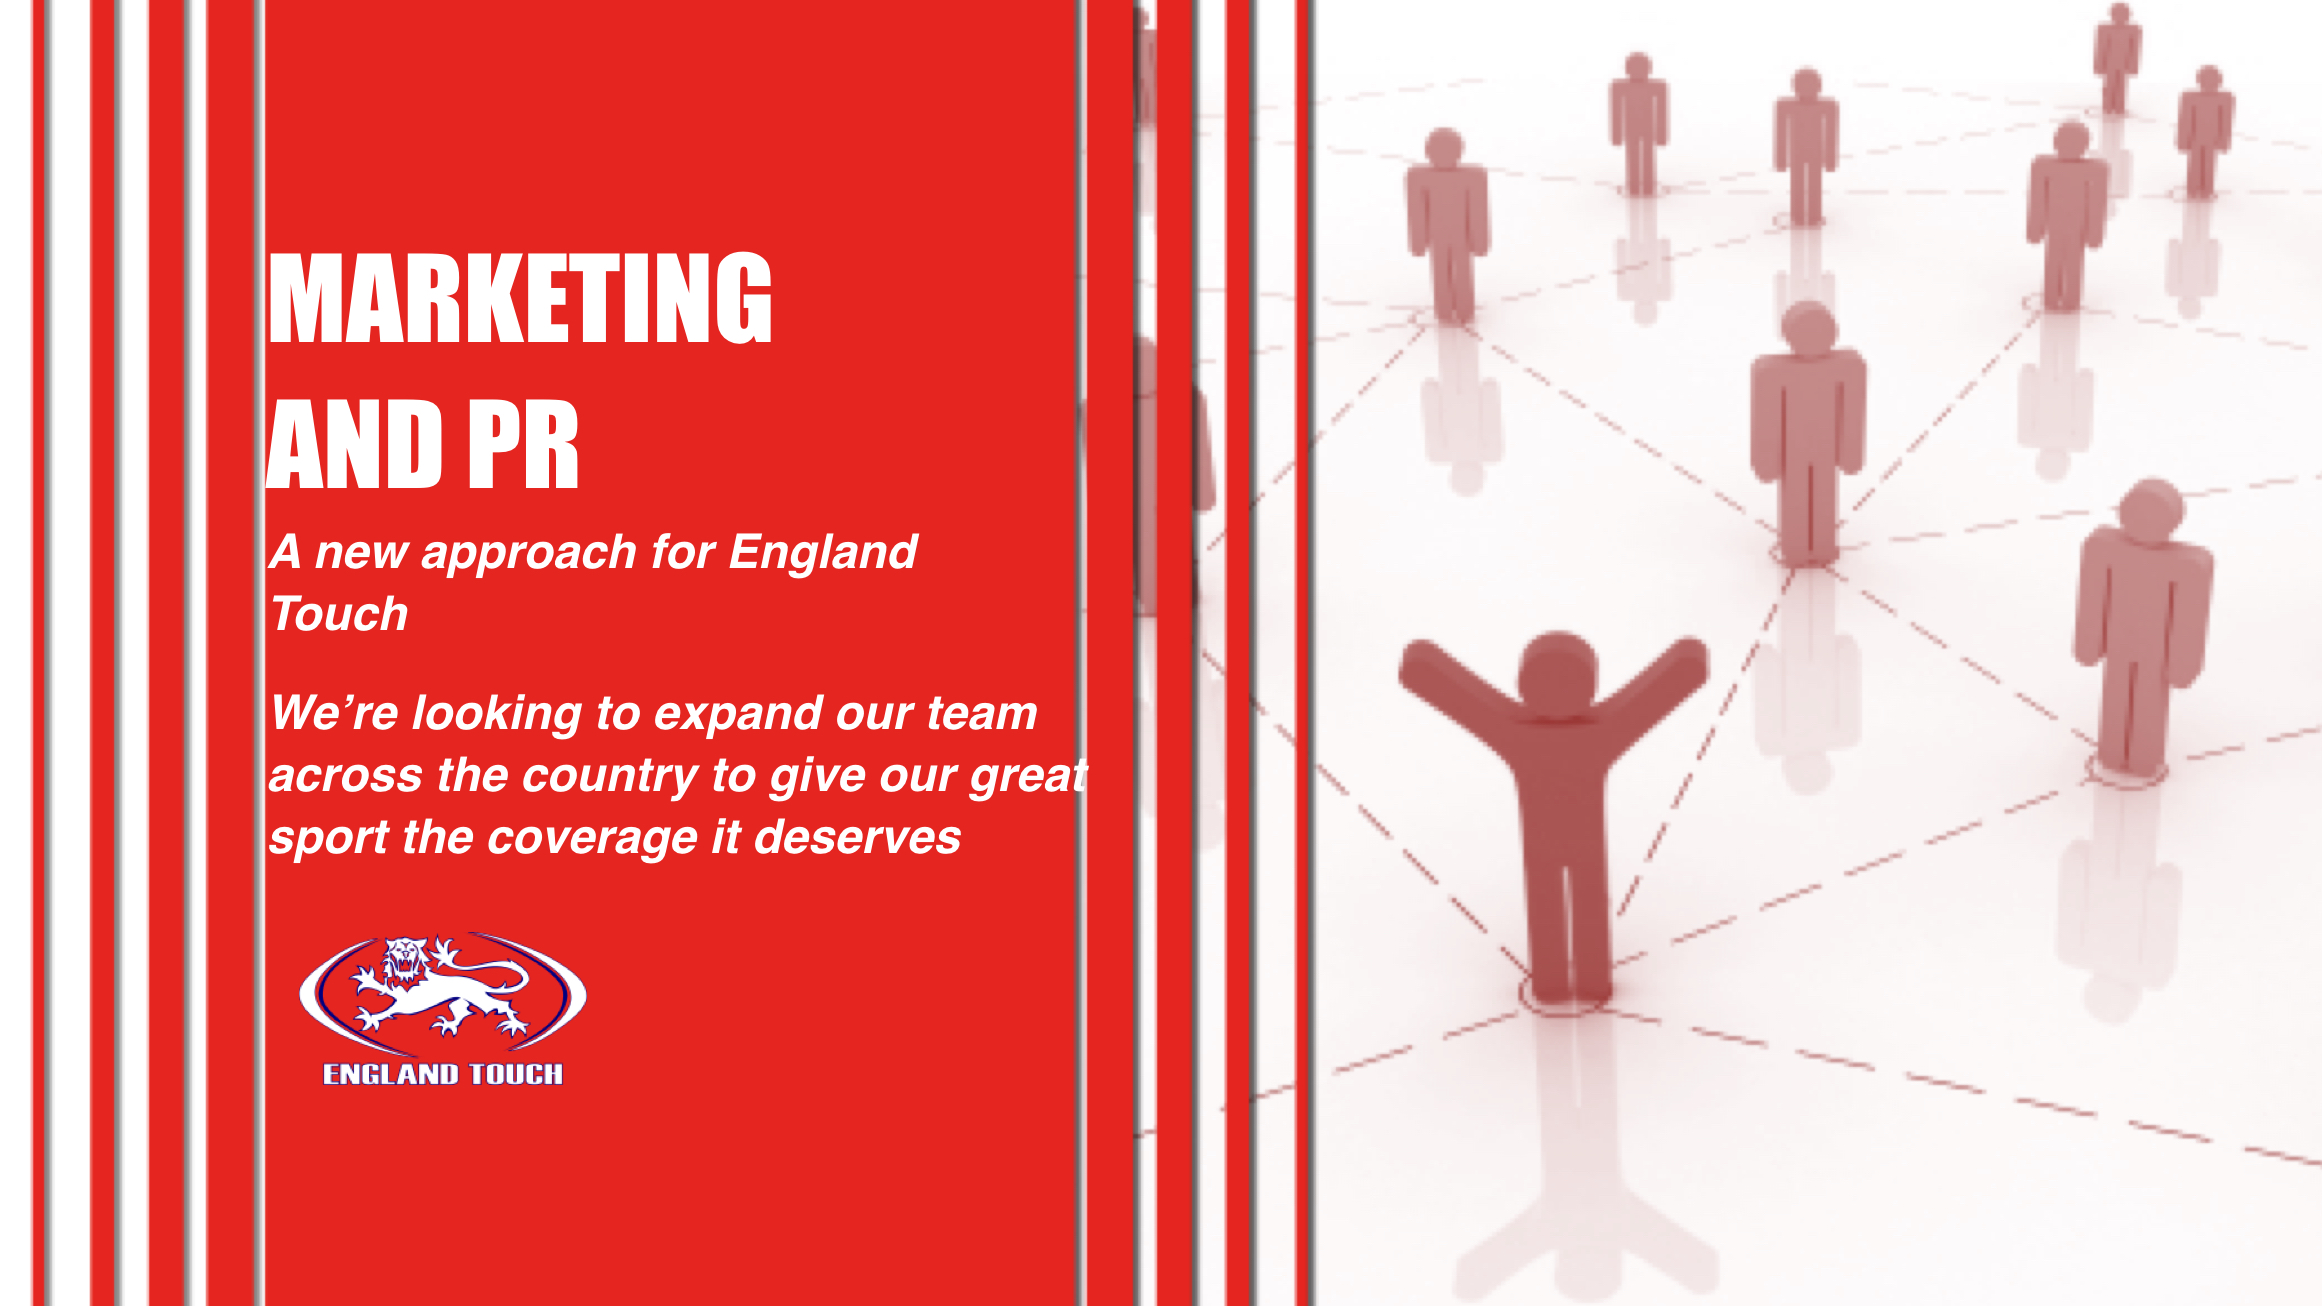 England Touch reshaping marketing and PR in 2017